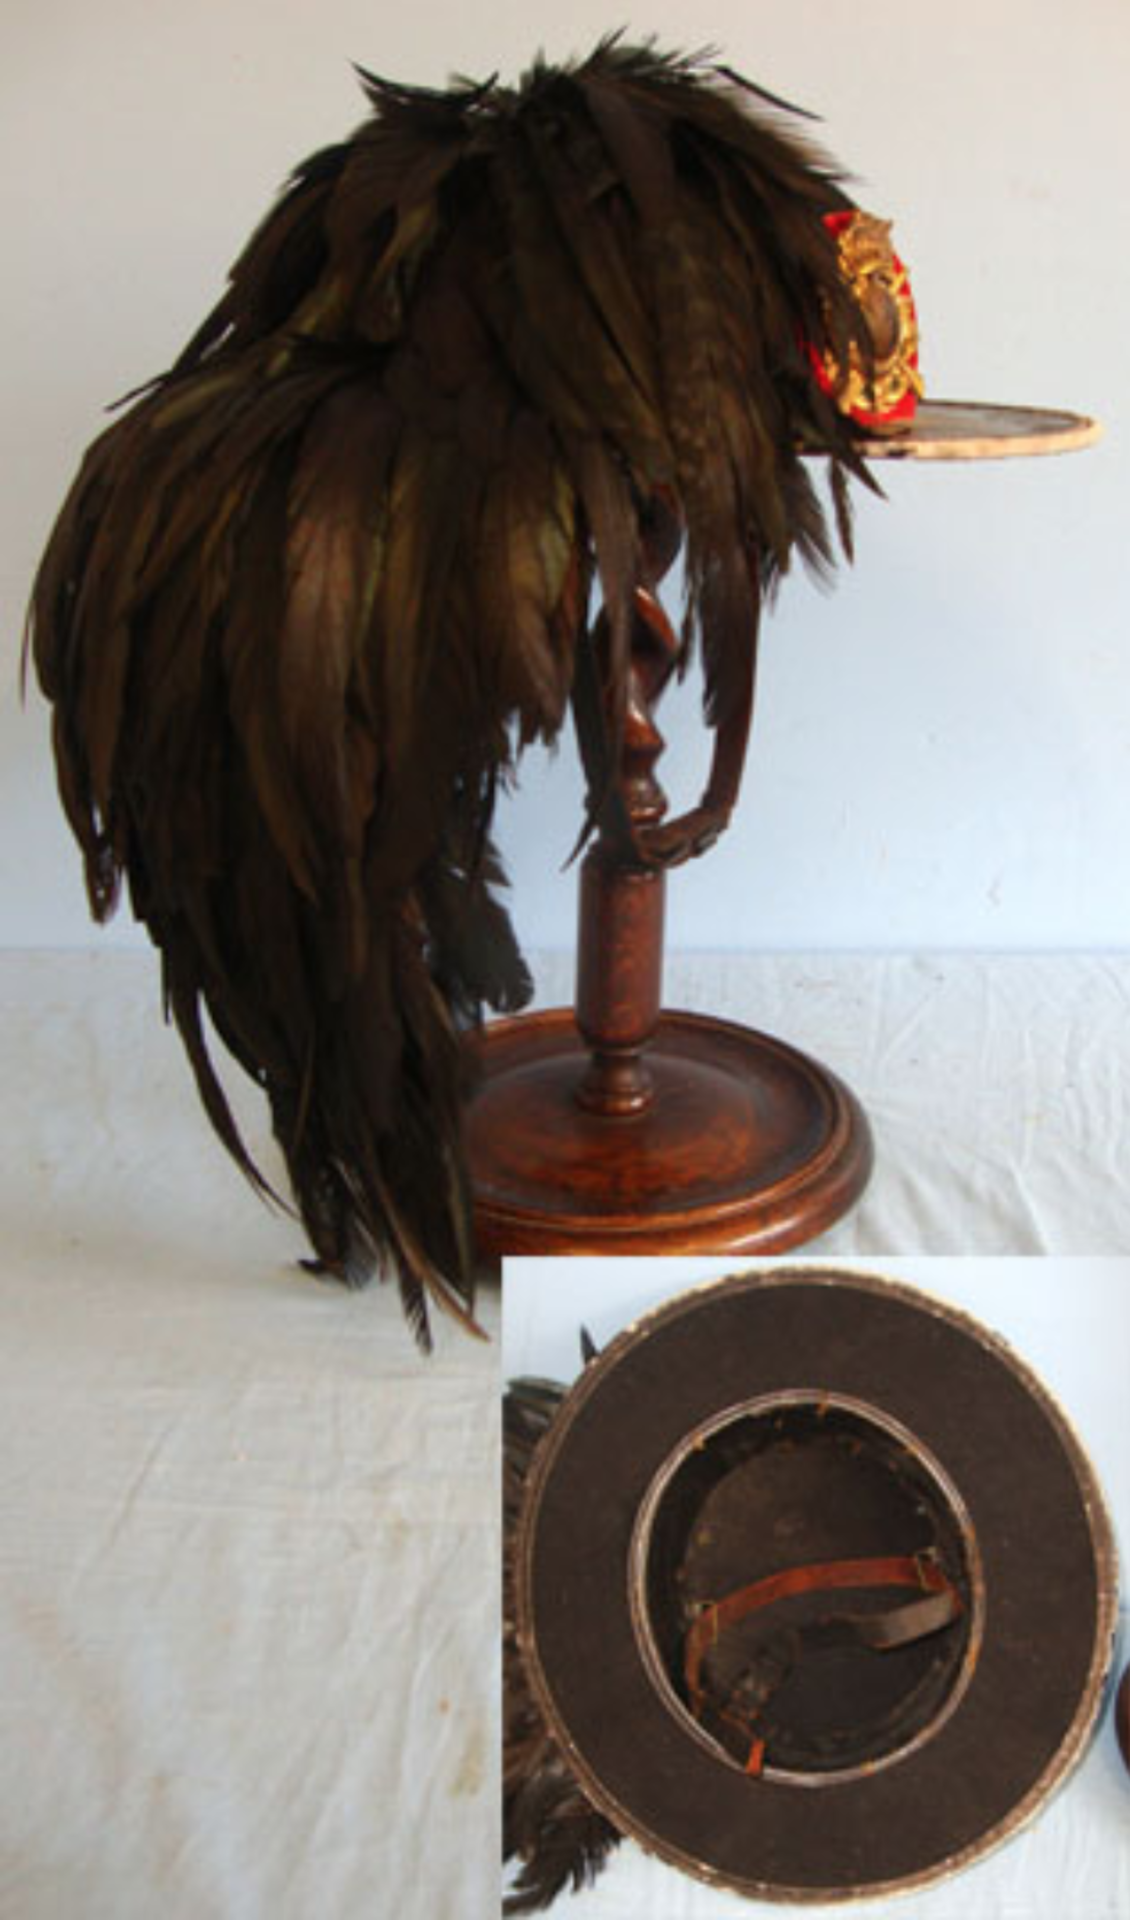 WW2 Era Bersaglieri Light Infantry Hat With 1st Bersaglieri Plate & Black Capercaillie Feather - Image 3 of 3